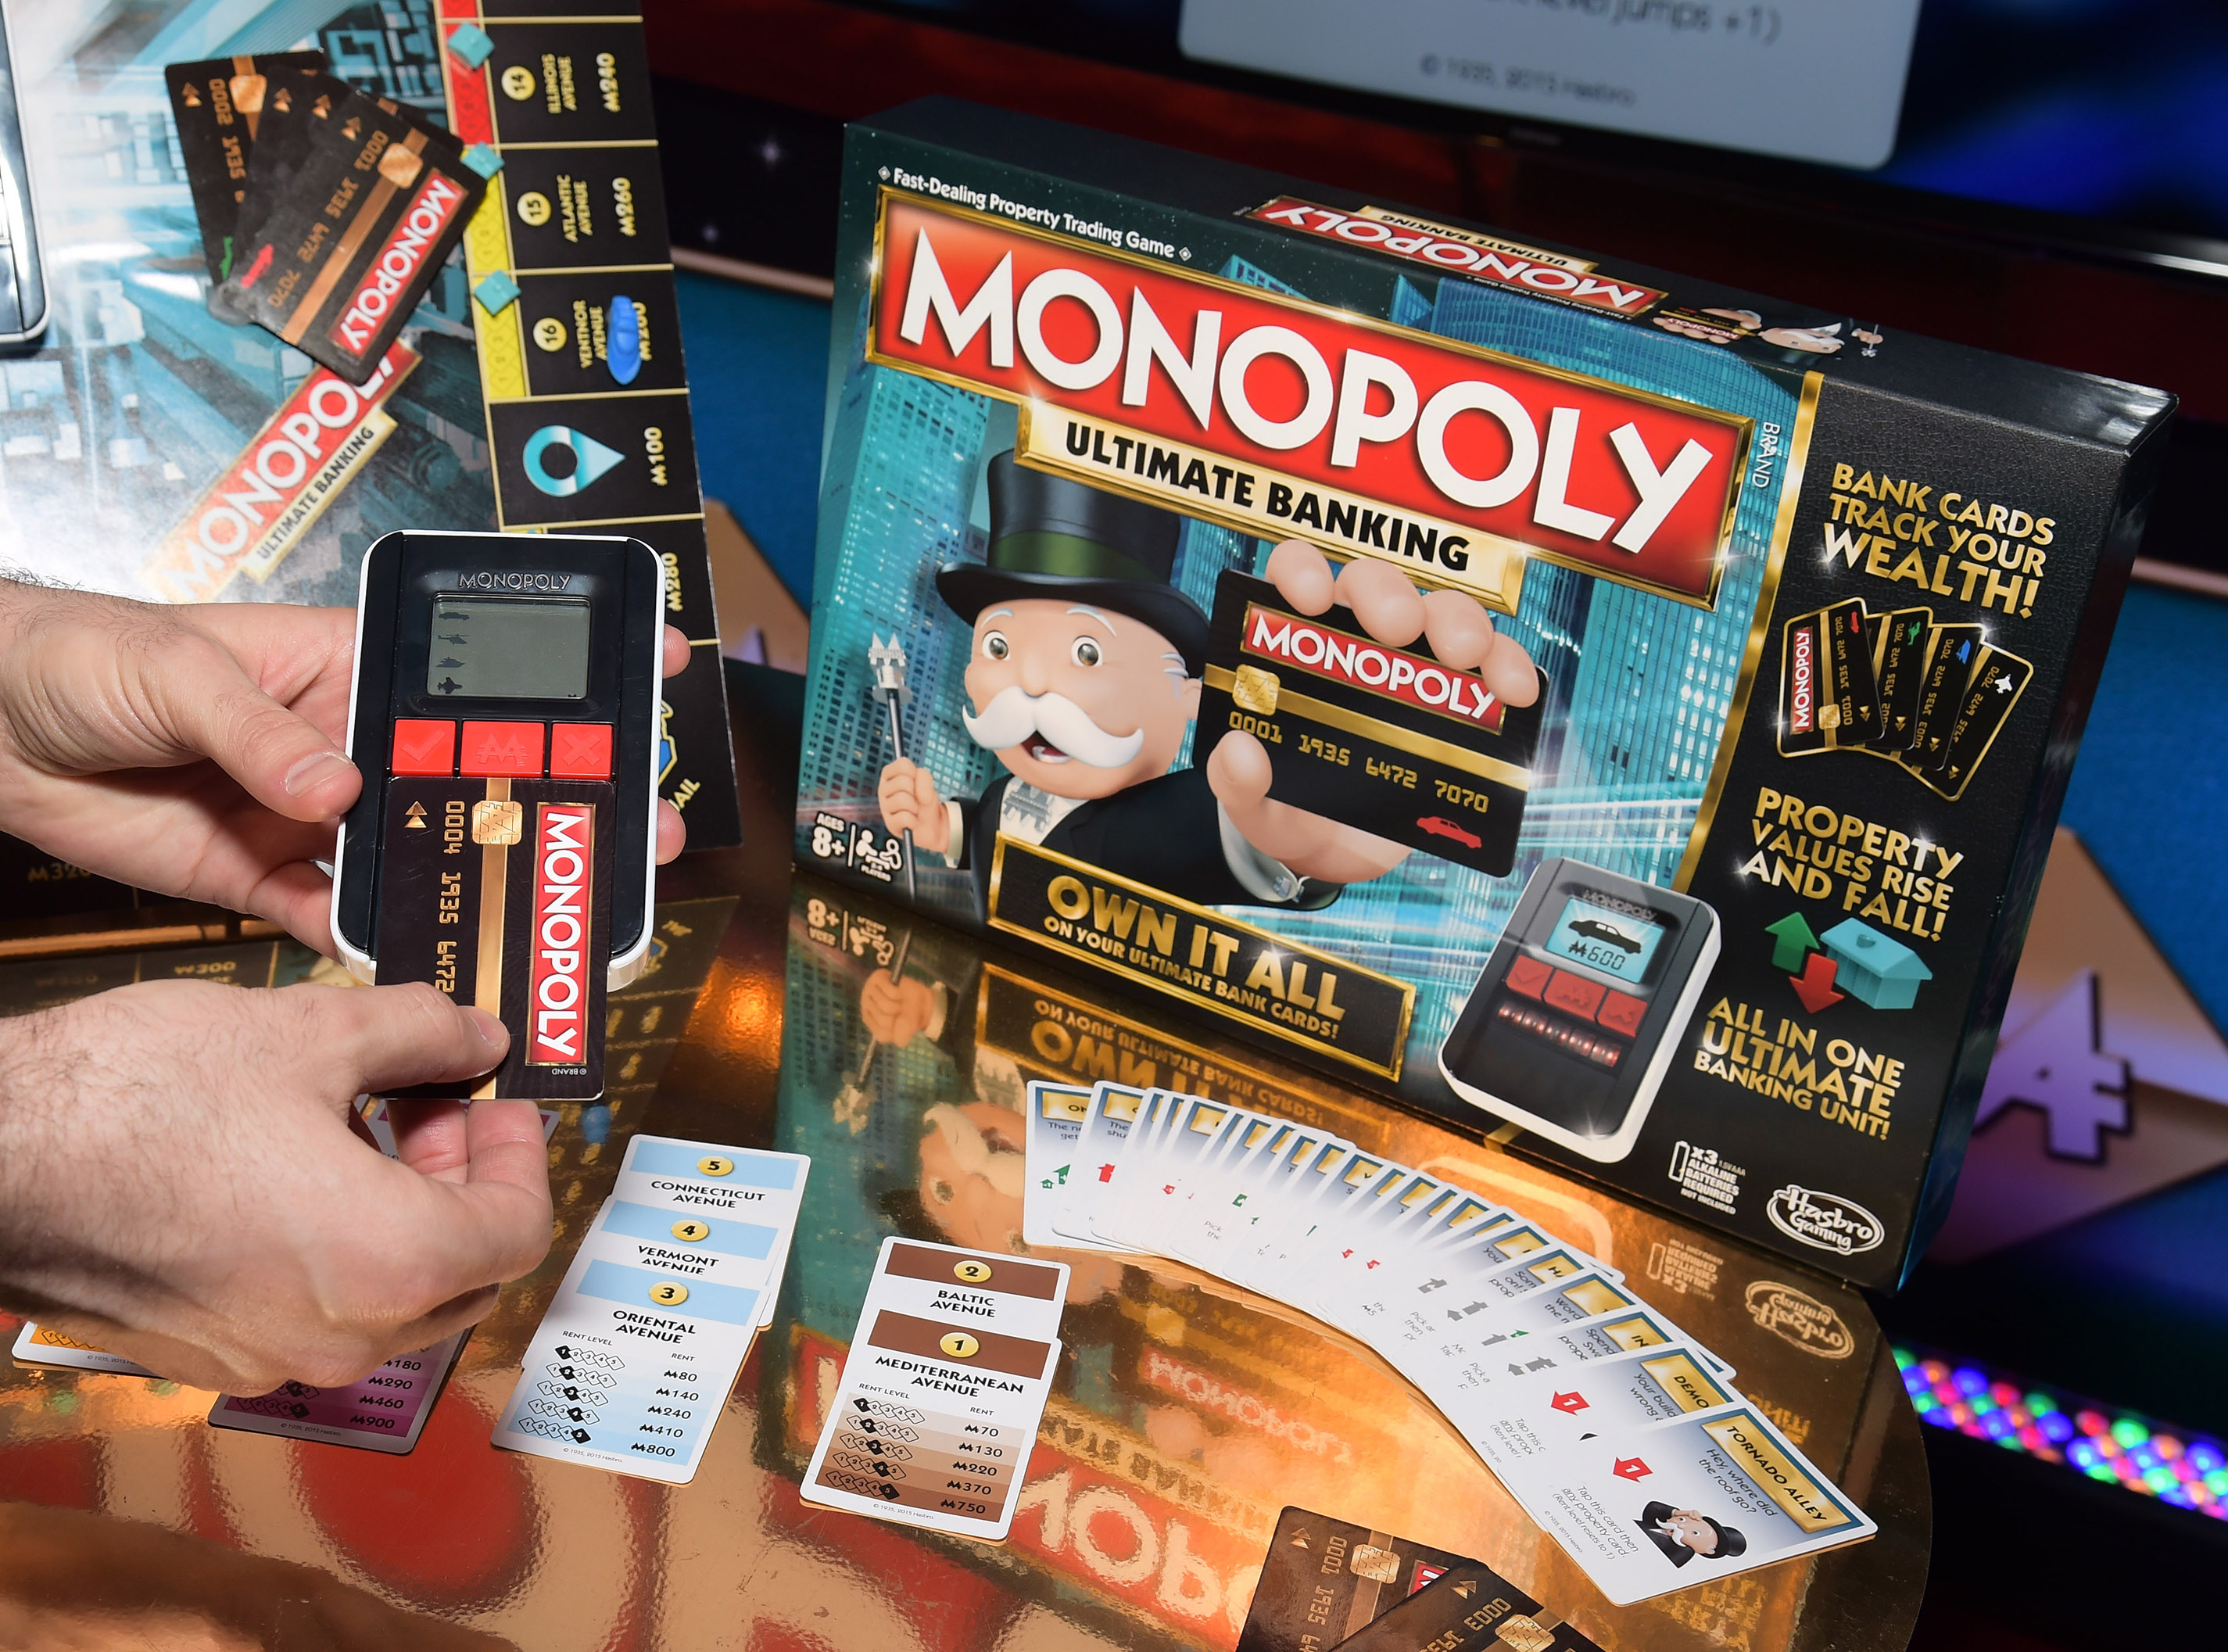 New Monopoly edition does away with cash